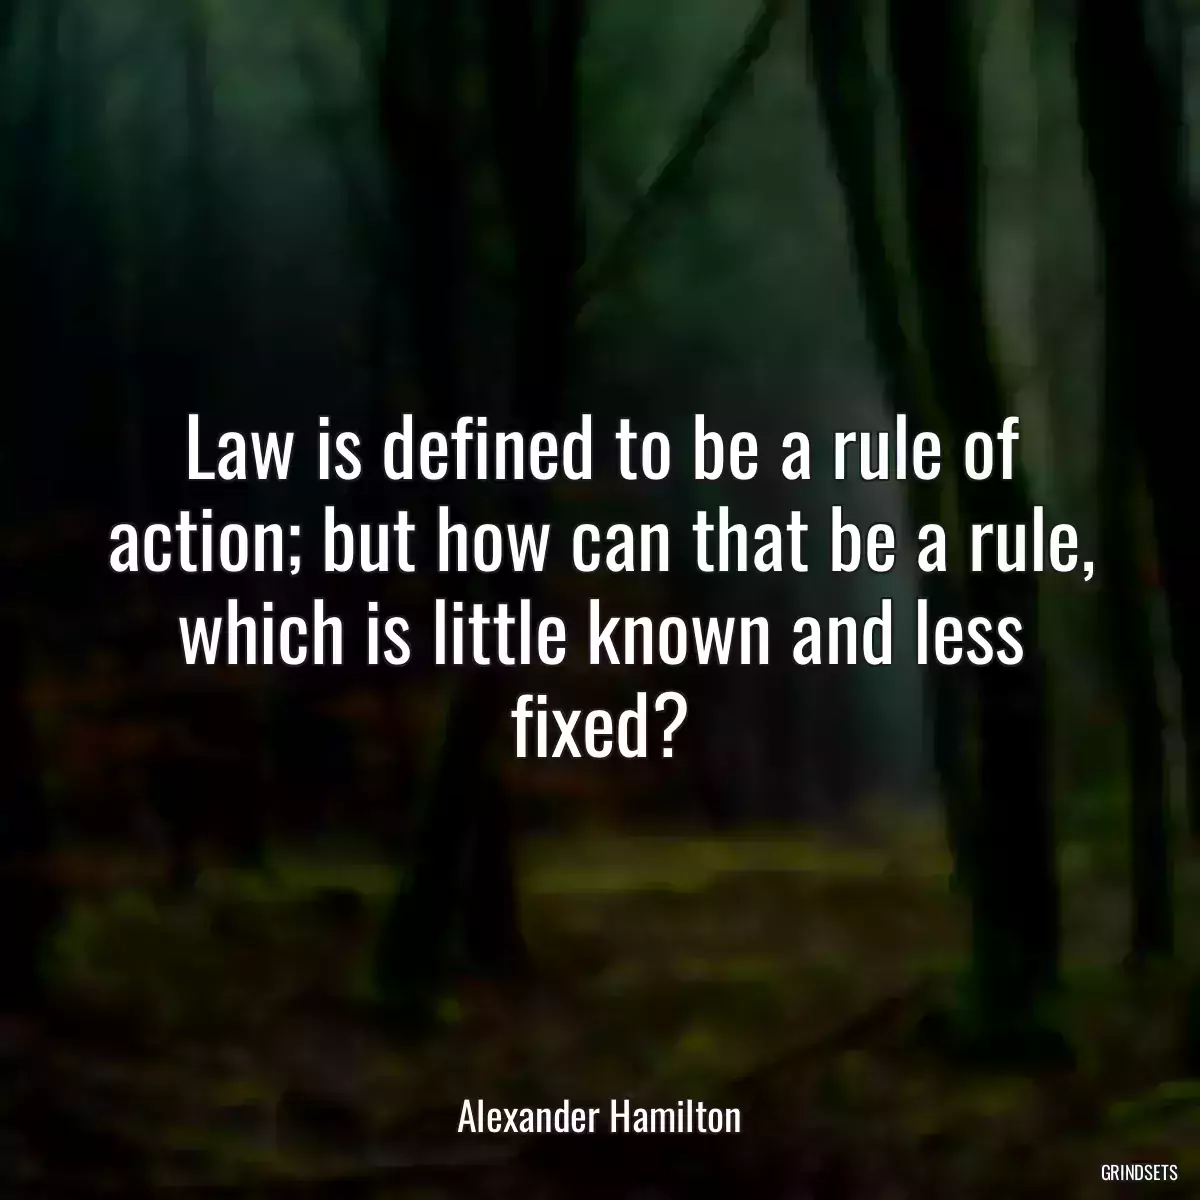 Law is defined to be a rule of action; but how can that be a rule, which is little known and less fixed?